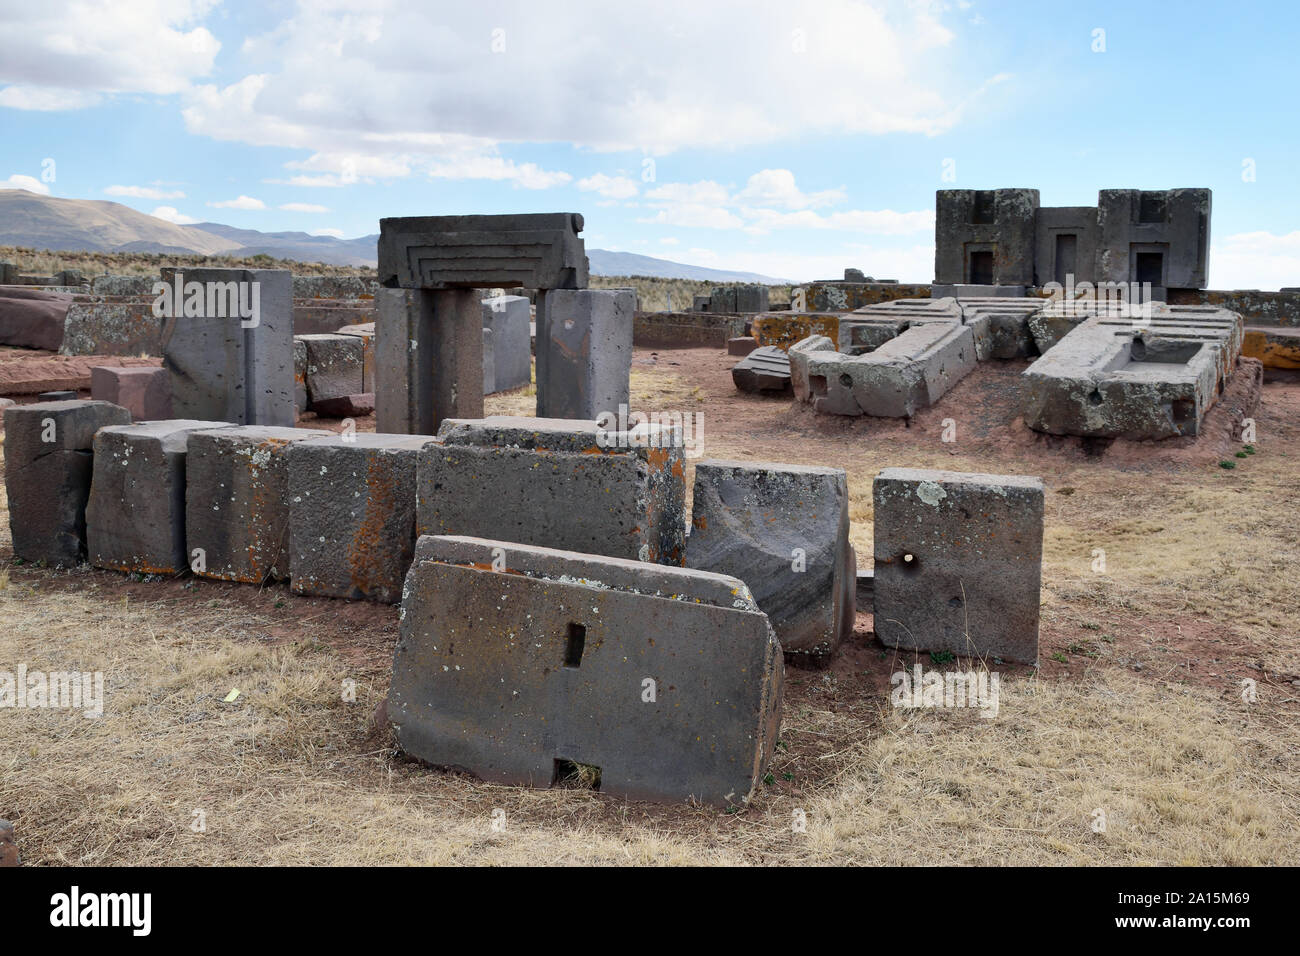 Ruins of Pumapunku Puma Punku part of a large temple complex or monument that is part of the Tiwanaku Site near Tiwanaku Bolivia Stock Photo - Alamy